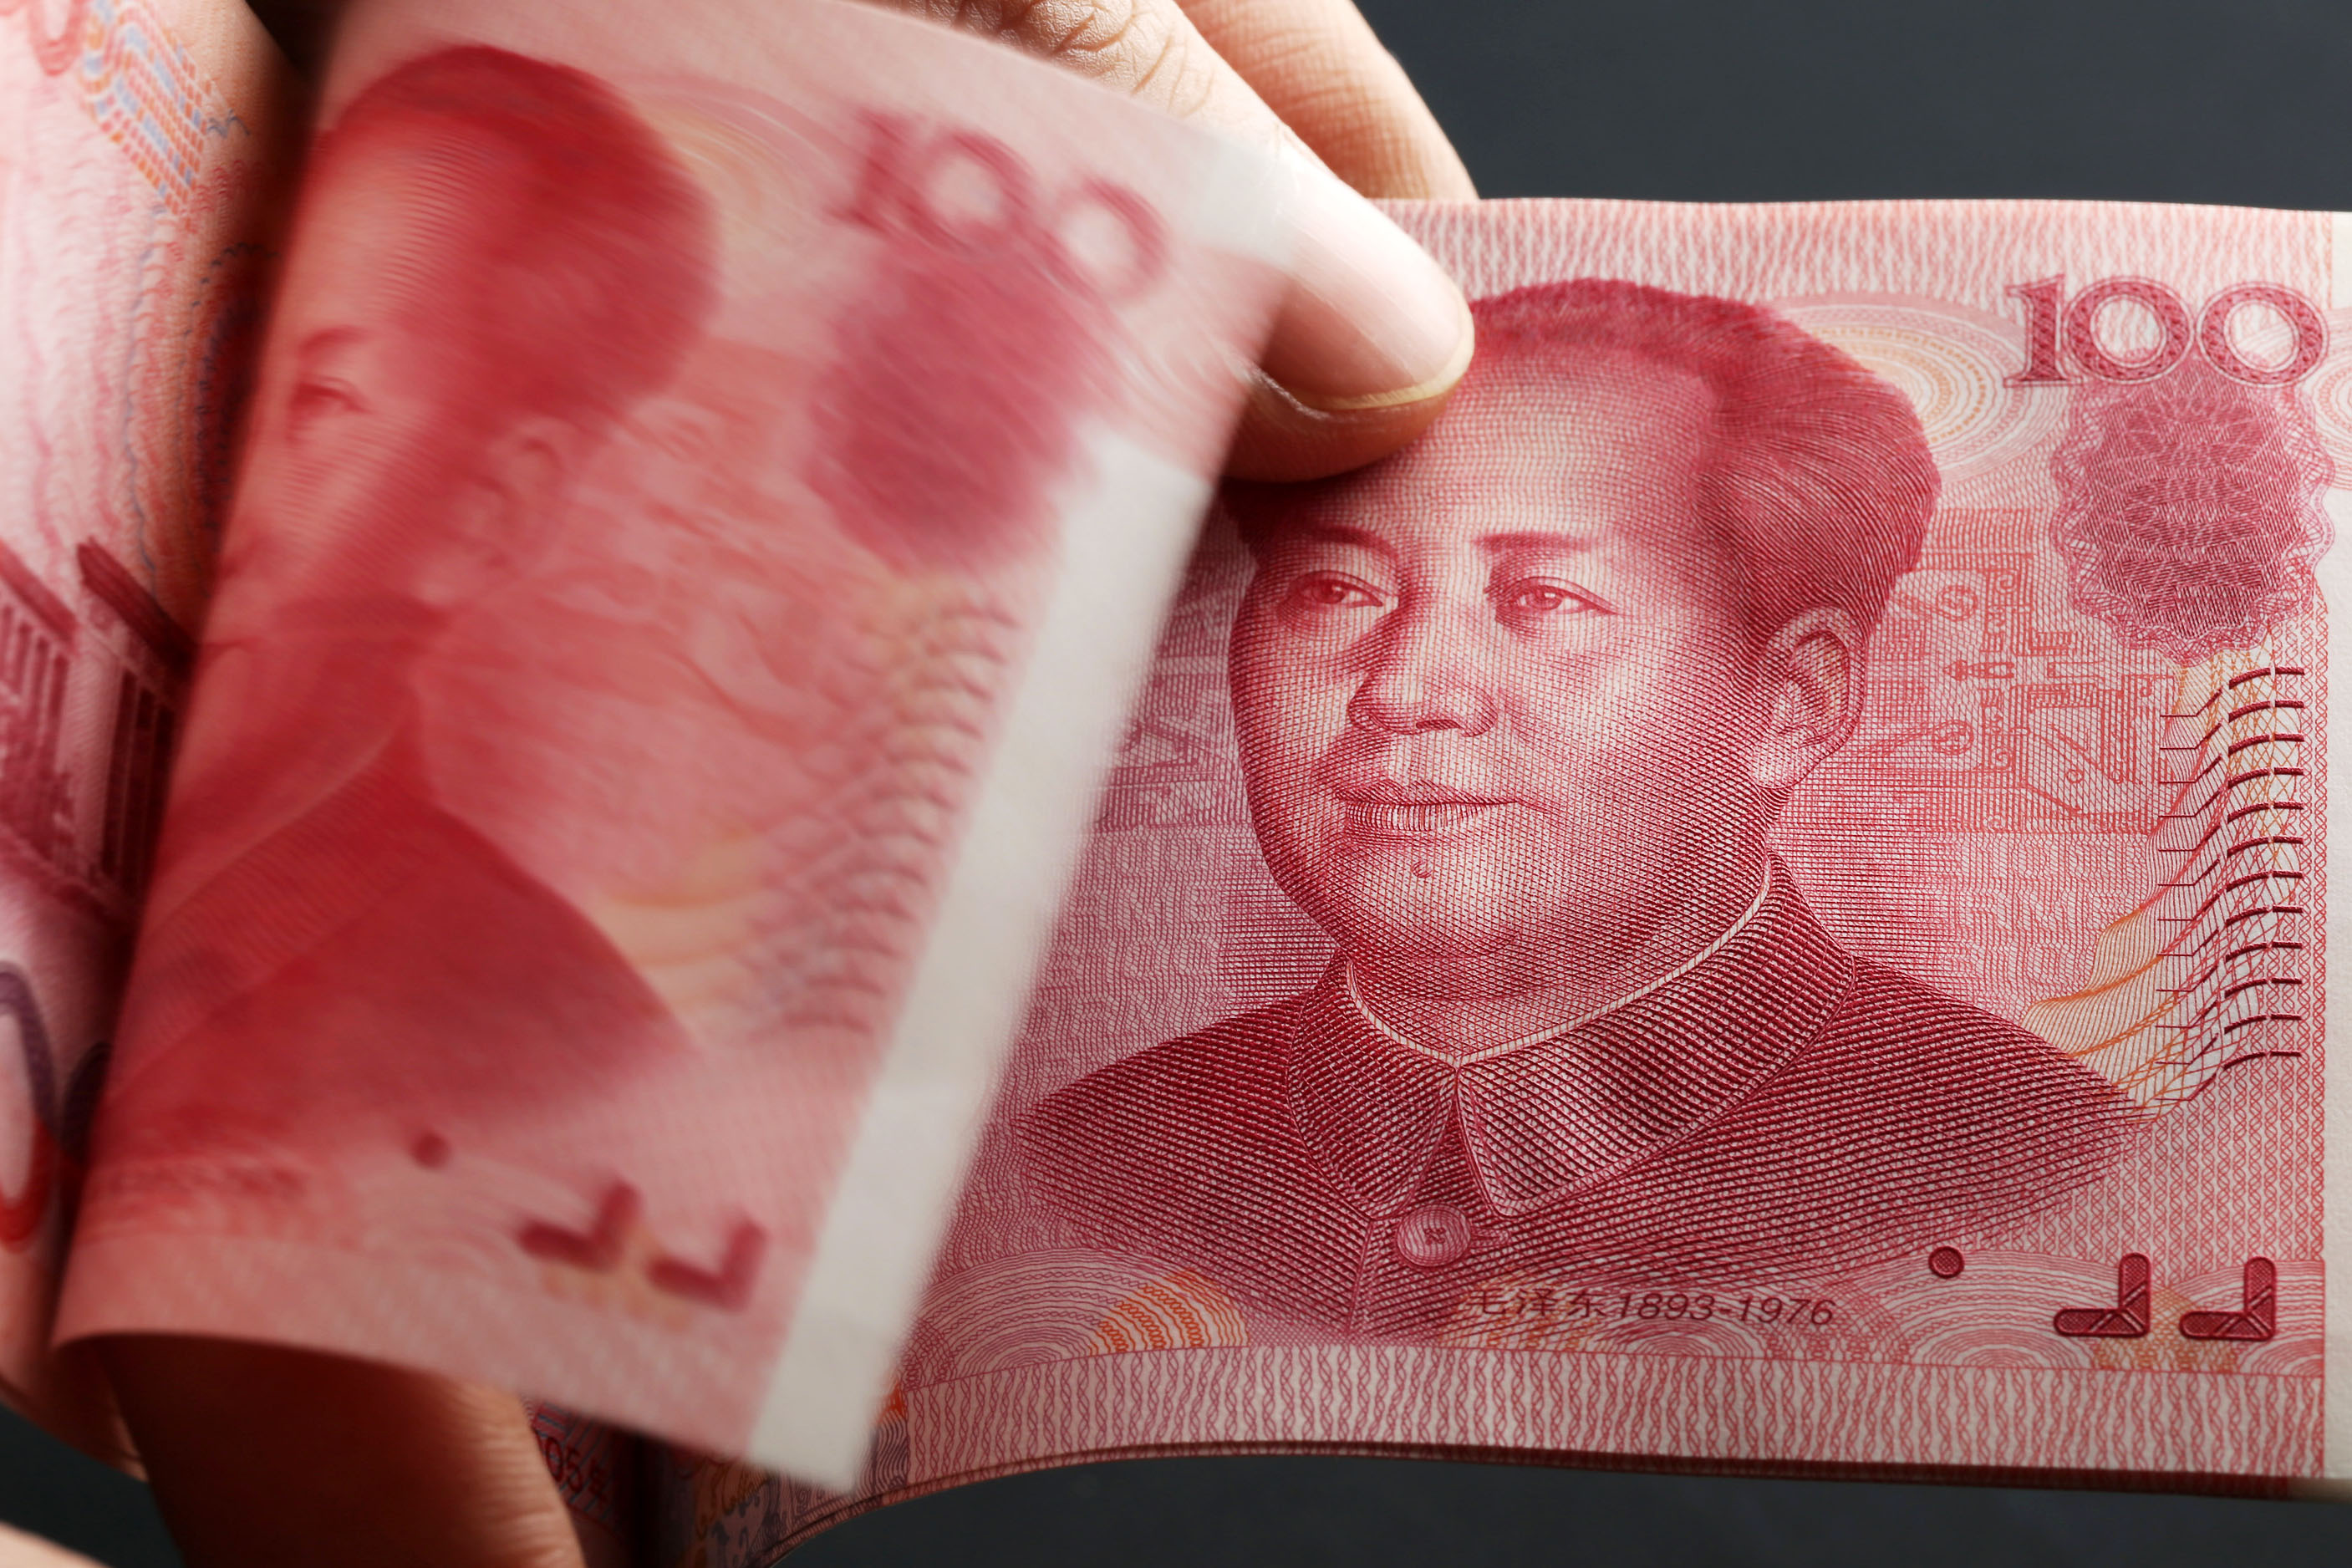 Chinese one-hundred yuan banknotes are arranged for a photograph.
